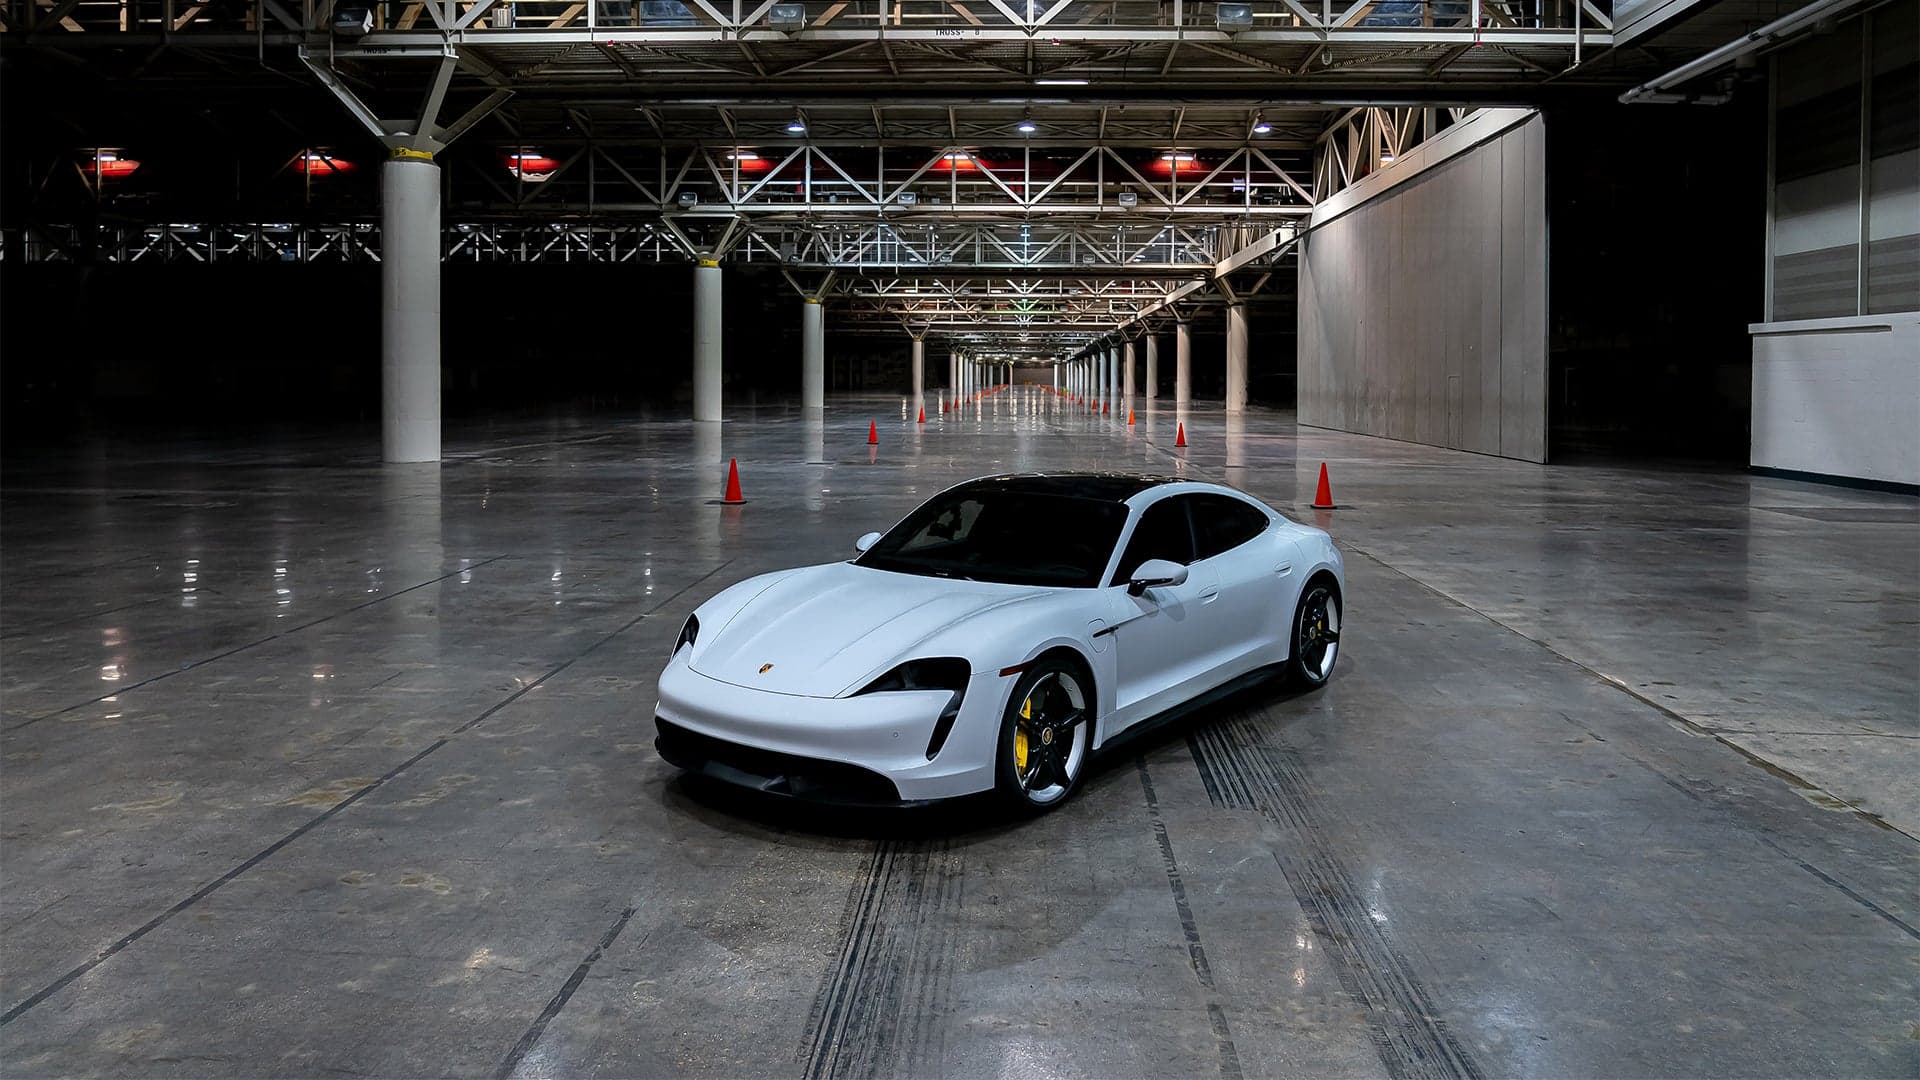 Porsche Taycan Turbo S Breaks Indoor Speed Record With 102-MPH Run Inside a Convention Center